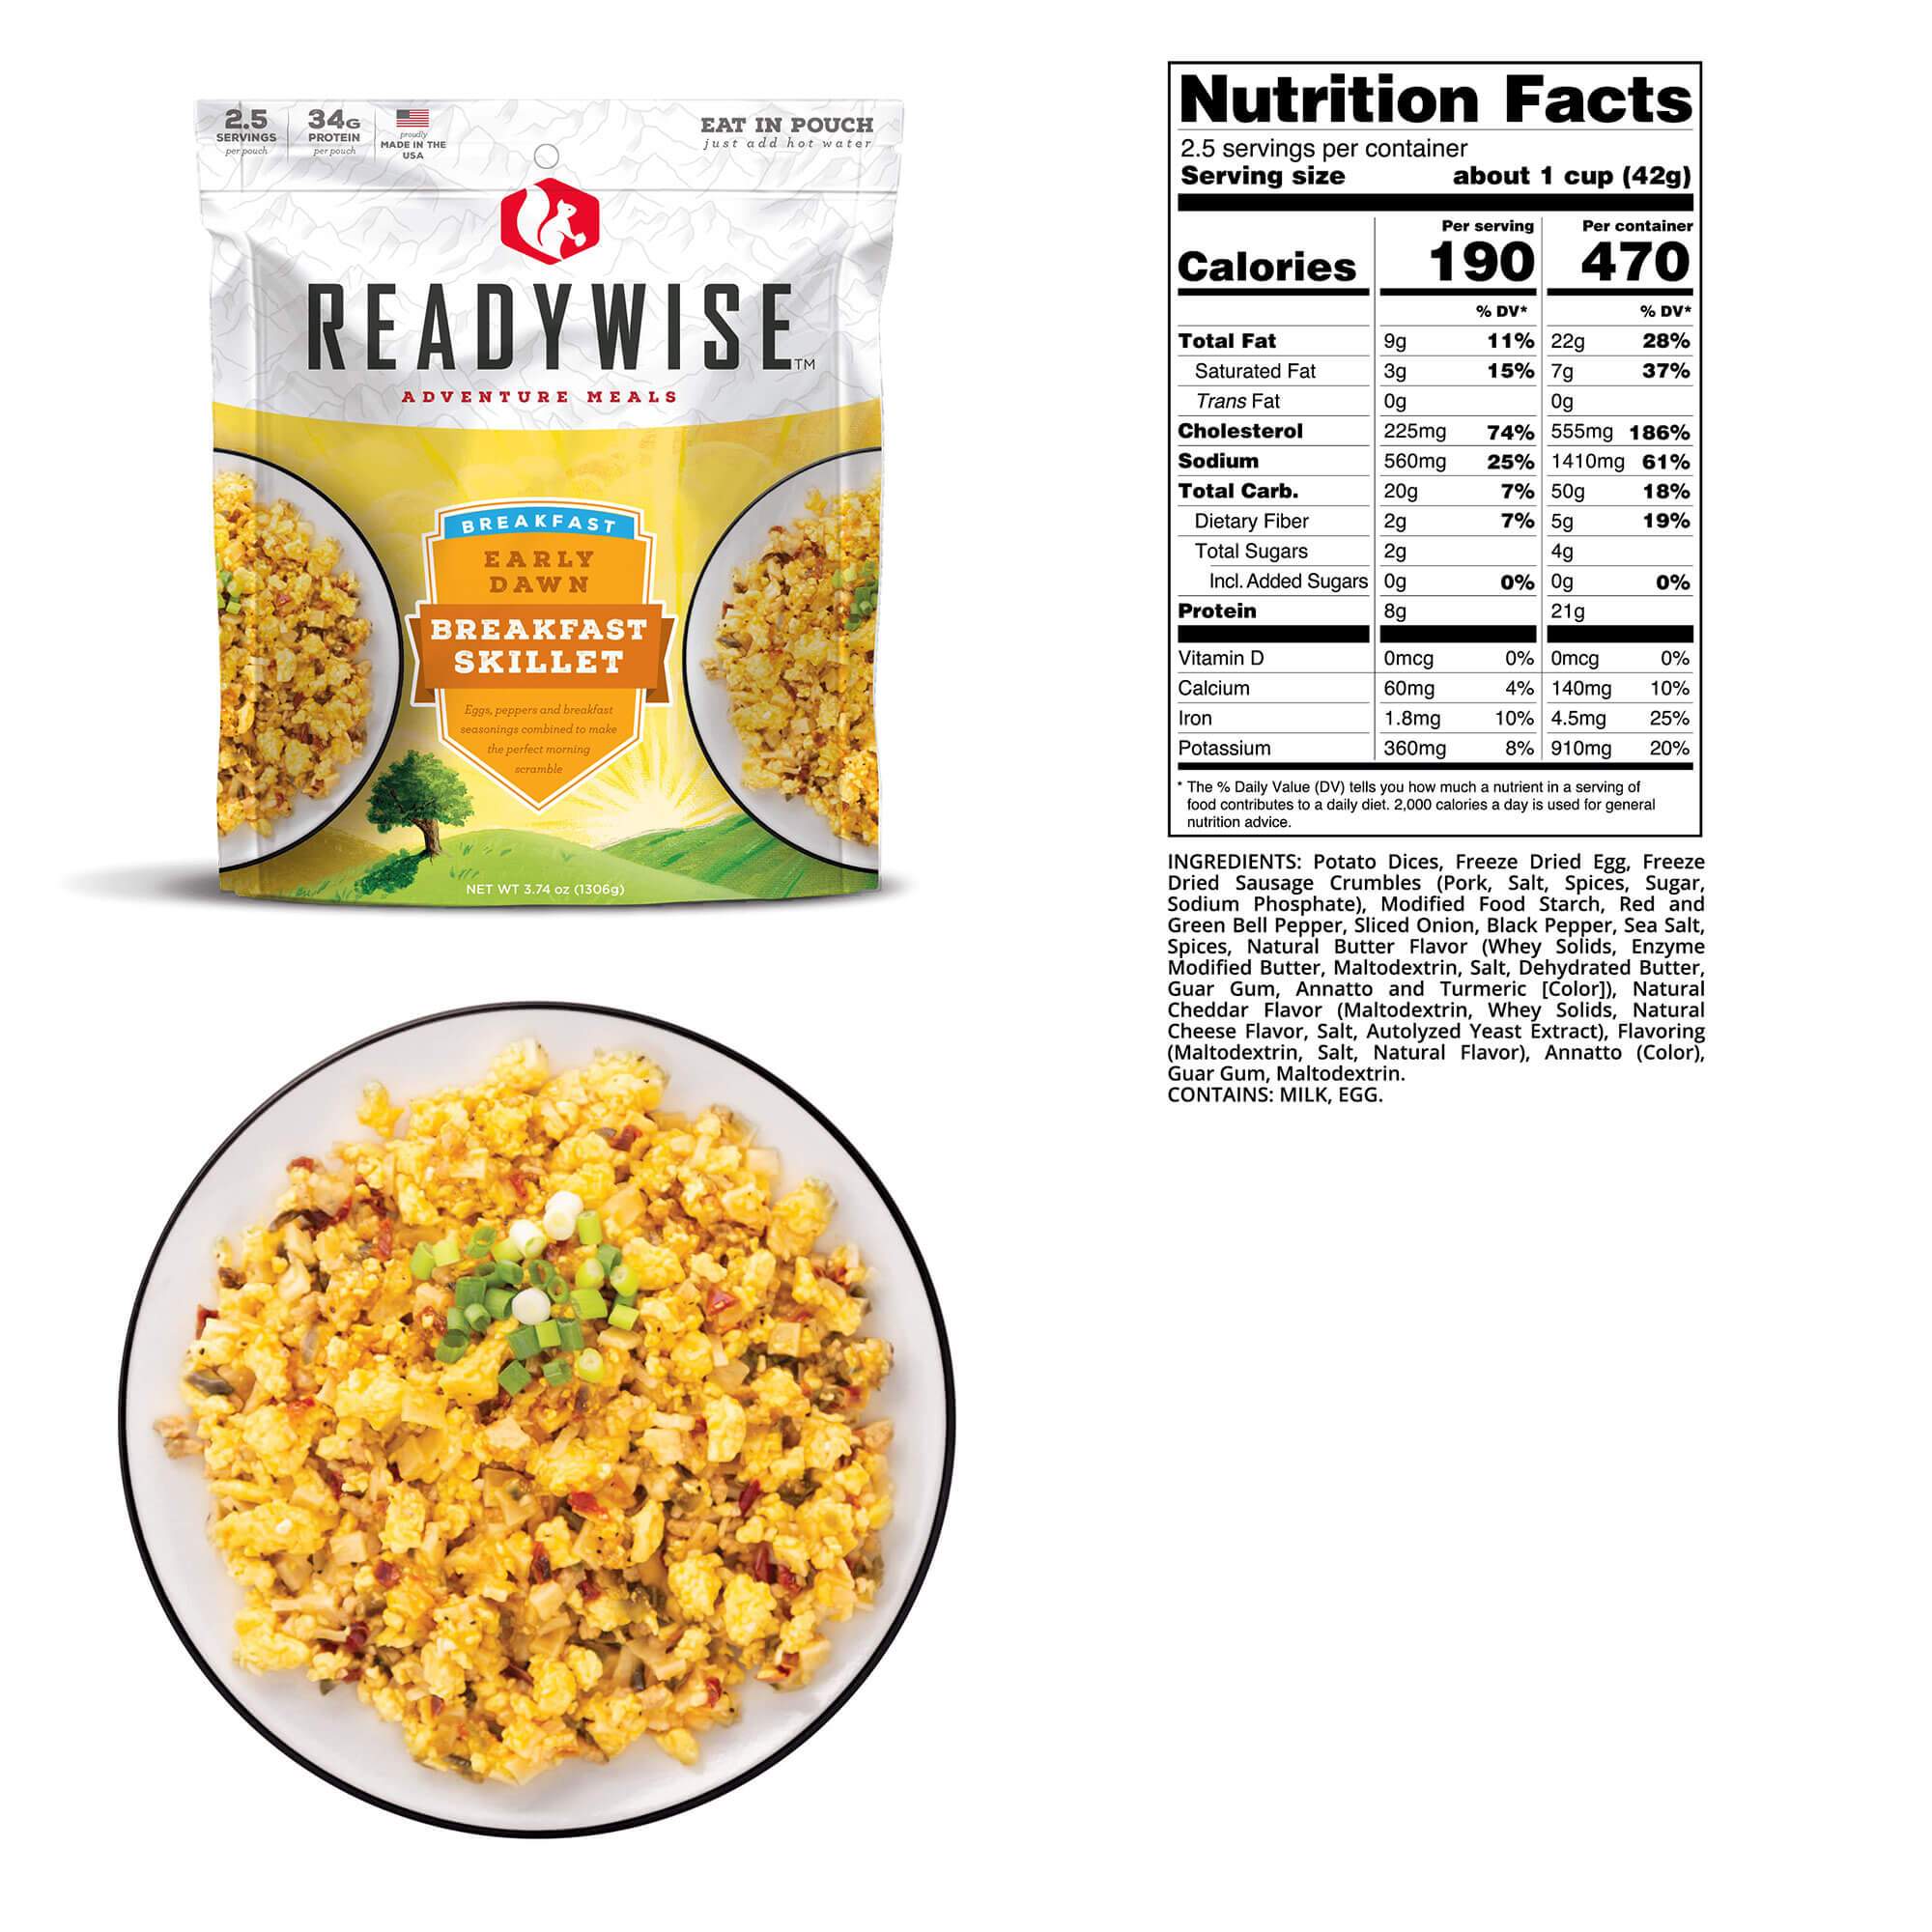 A bag of ReadyWise (formerly Wise Food Storage) Early Dawn Breakfast Skillet - 6 Pack (SHIPS IN 1-2 WEEKS) and a bag of ReadyWise (formerly Wise Food Storage) Early Dawn Breakfast Skillet - 6 Pack (SHIPS IN 1-2 WEEKS).